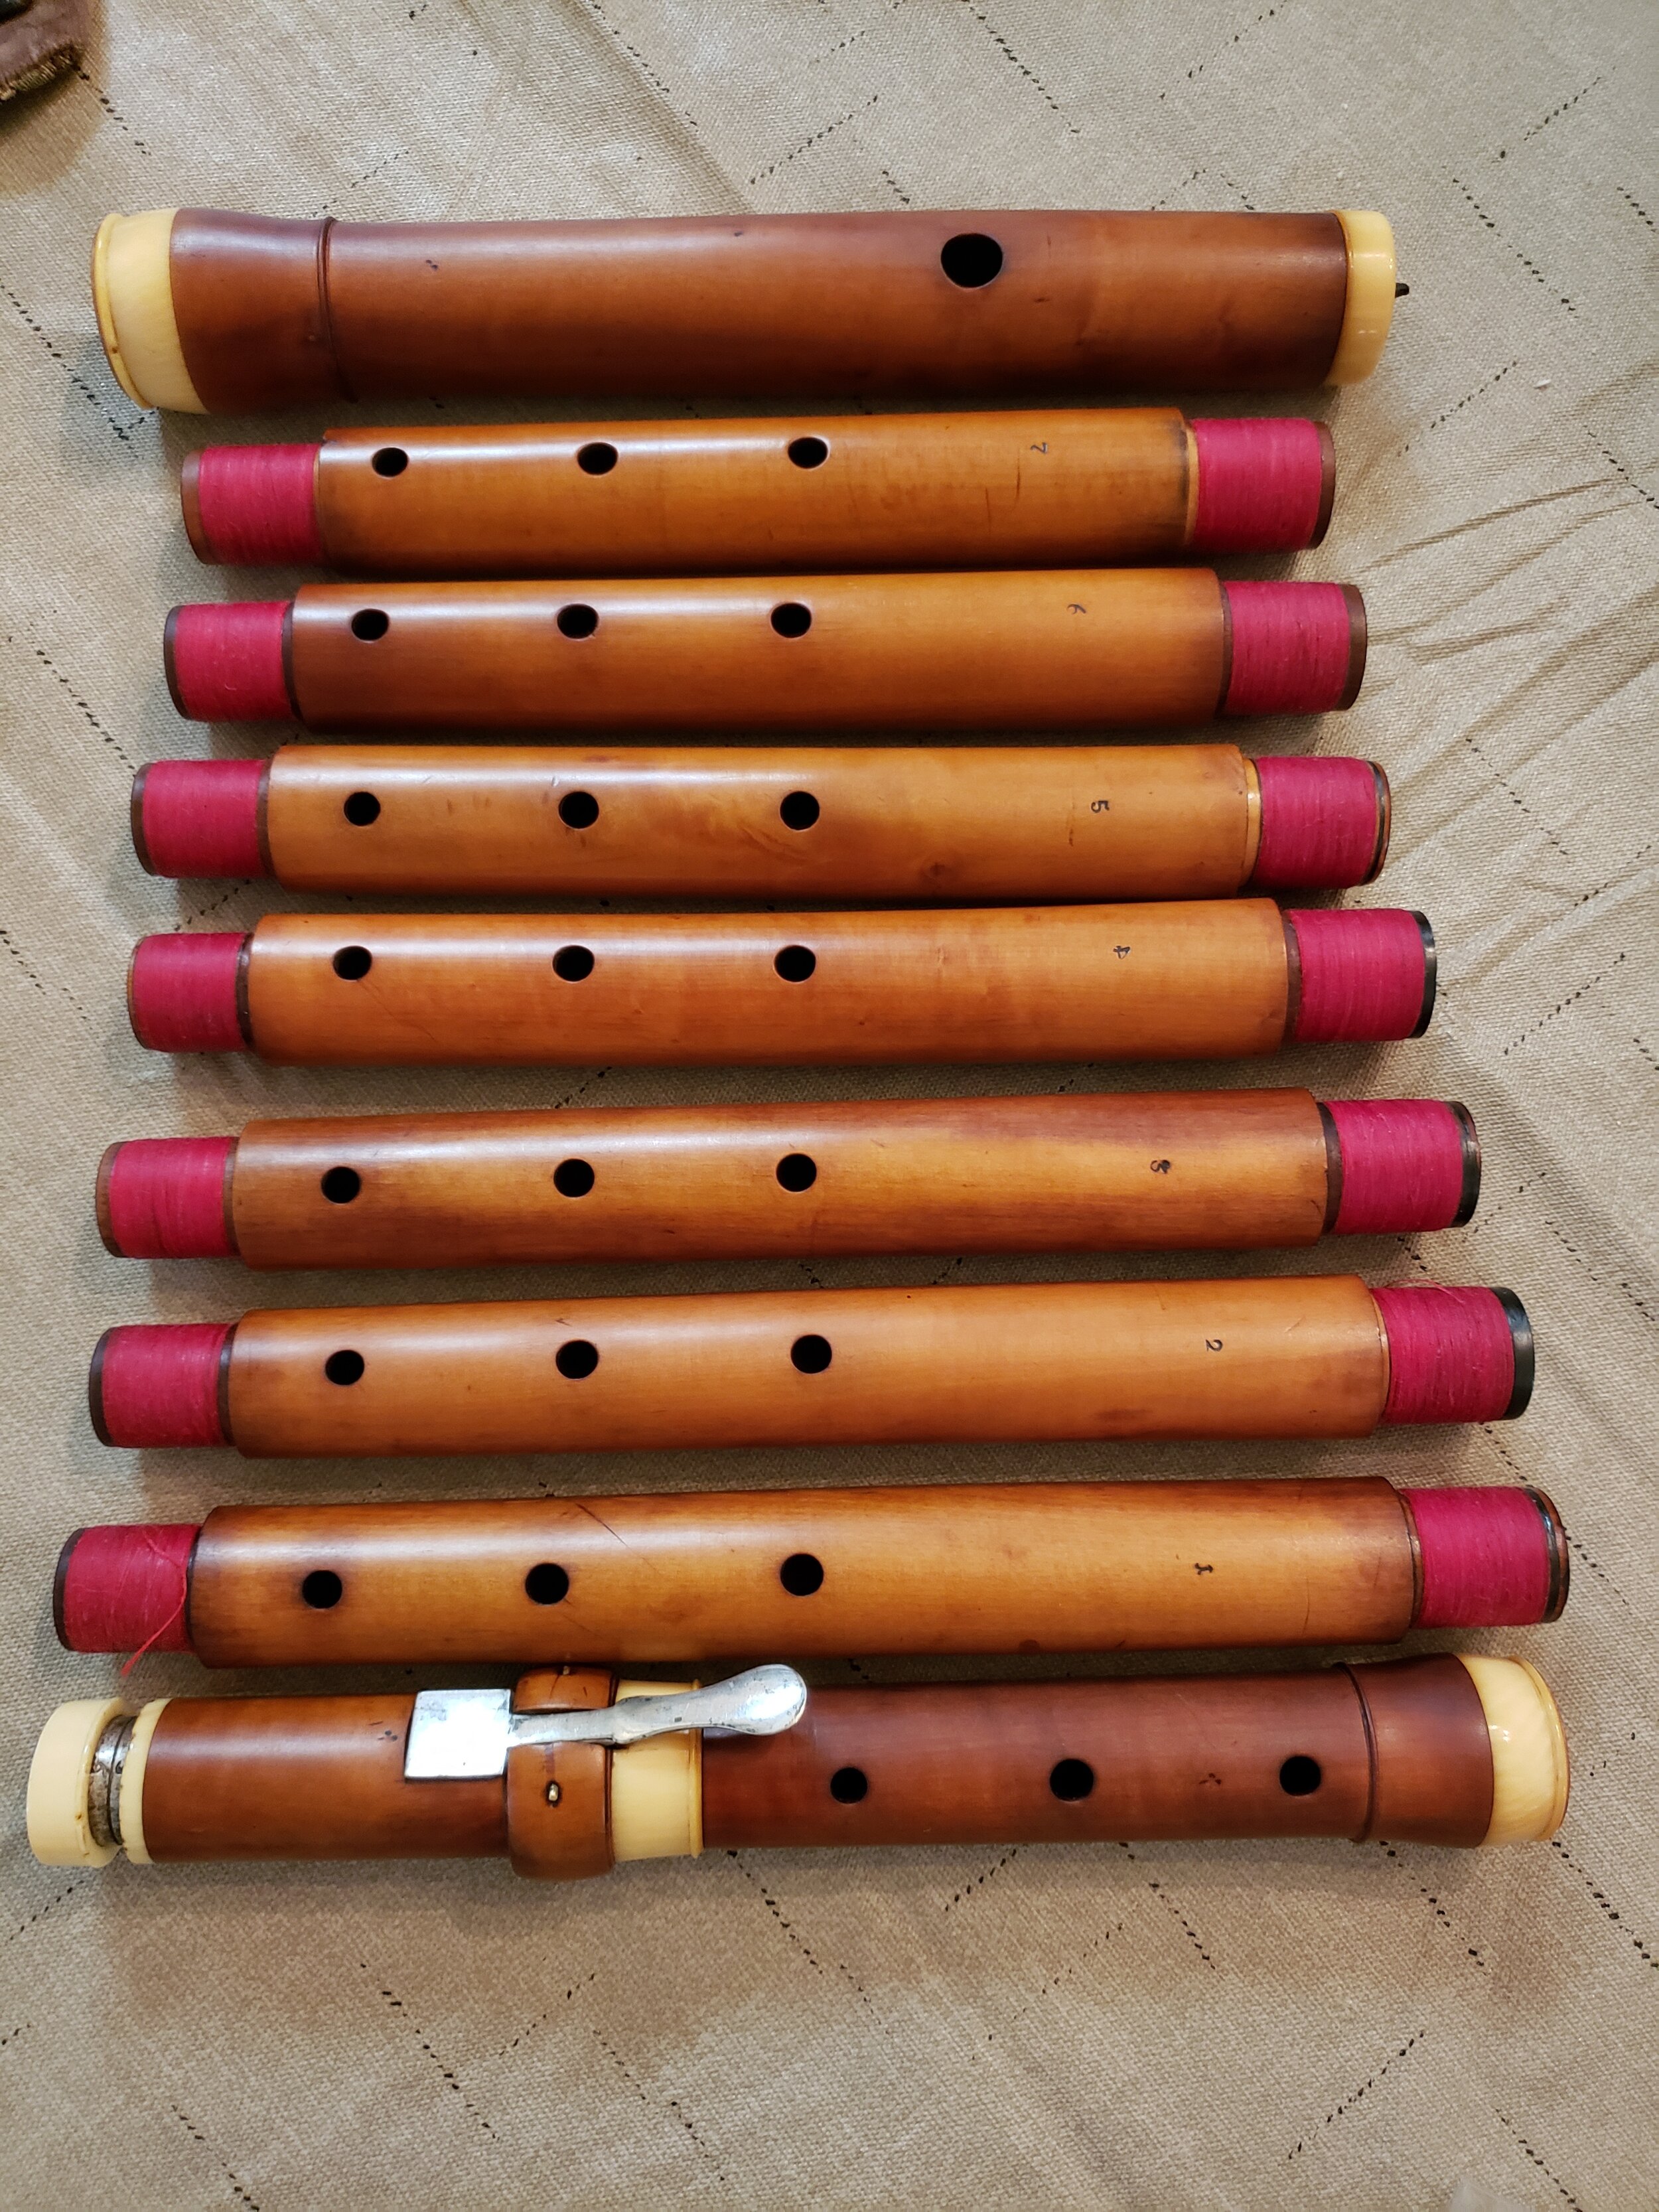  Anonymous 18th-Century flute with 7 corps de rechange. (Pitches from A=412-456) Restoration by Daniel Deitch 